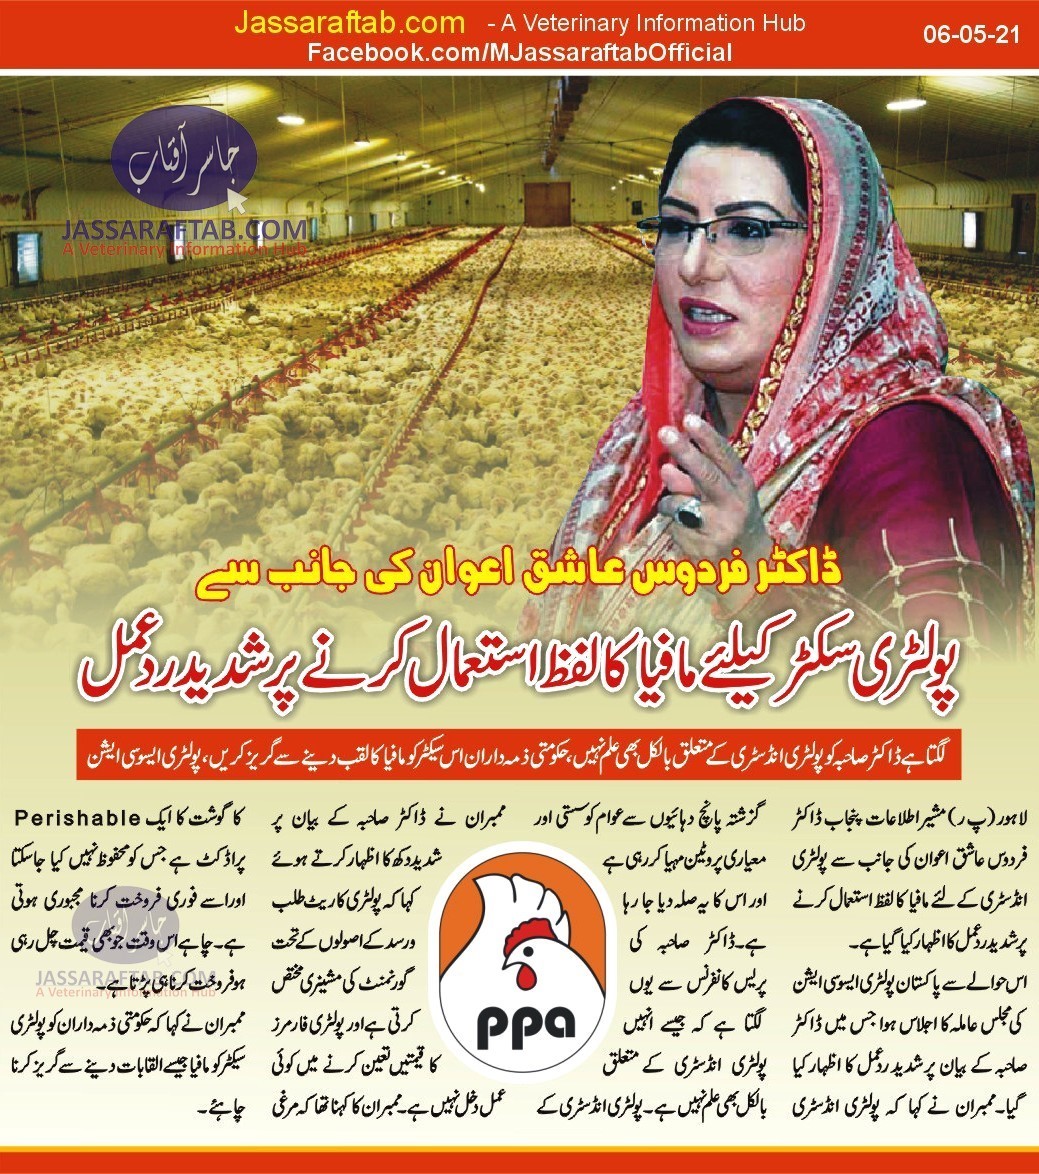 Poultry Sector as Mafia